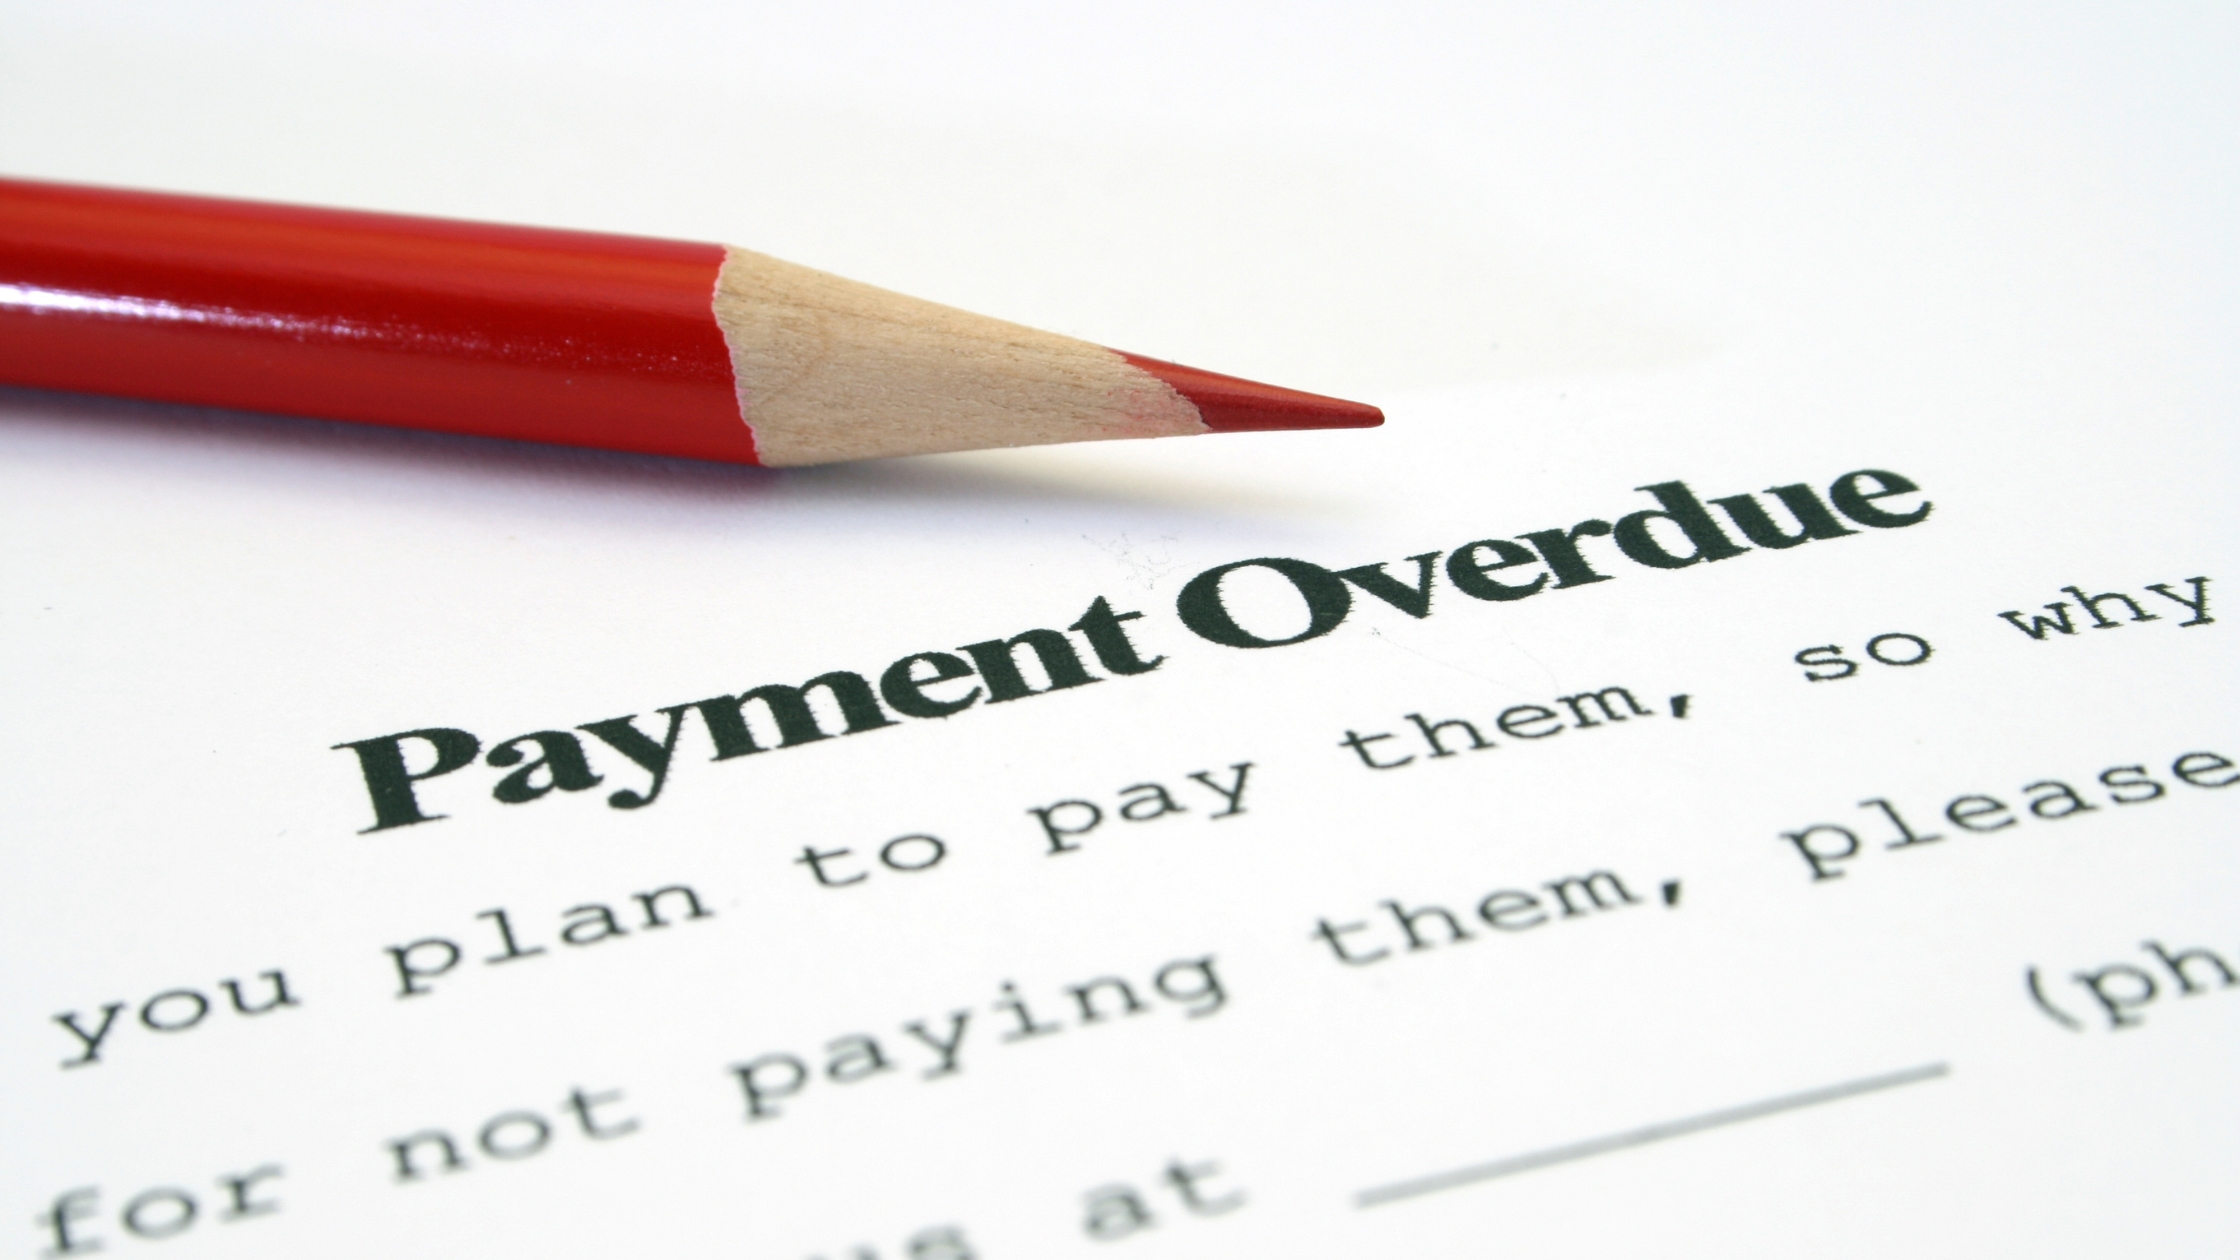 Commercial Debt Collection: A red pencil points to the words "Payment Overdue" on a debt collection notice, highlighting the need for innovative AI-driven solutions to improve commercial debt recovery.